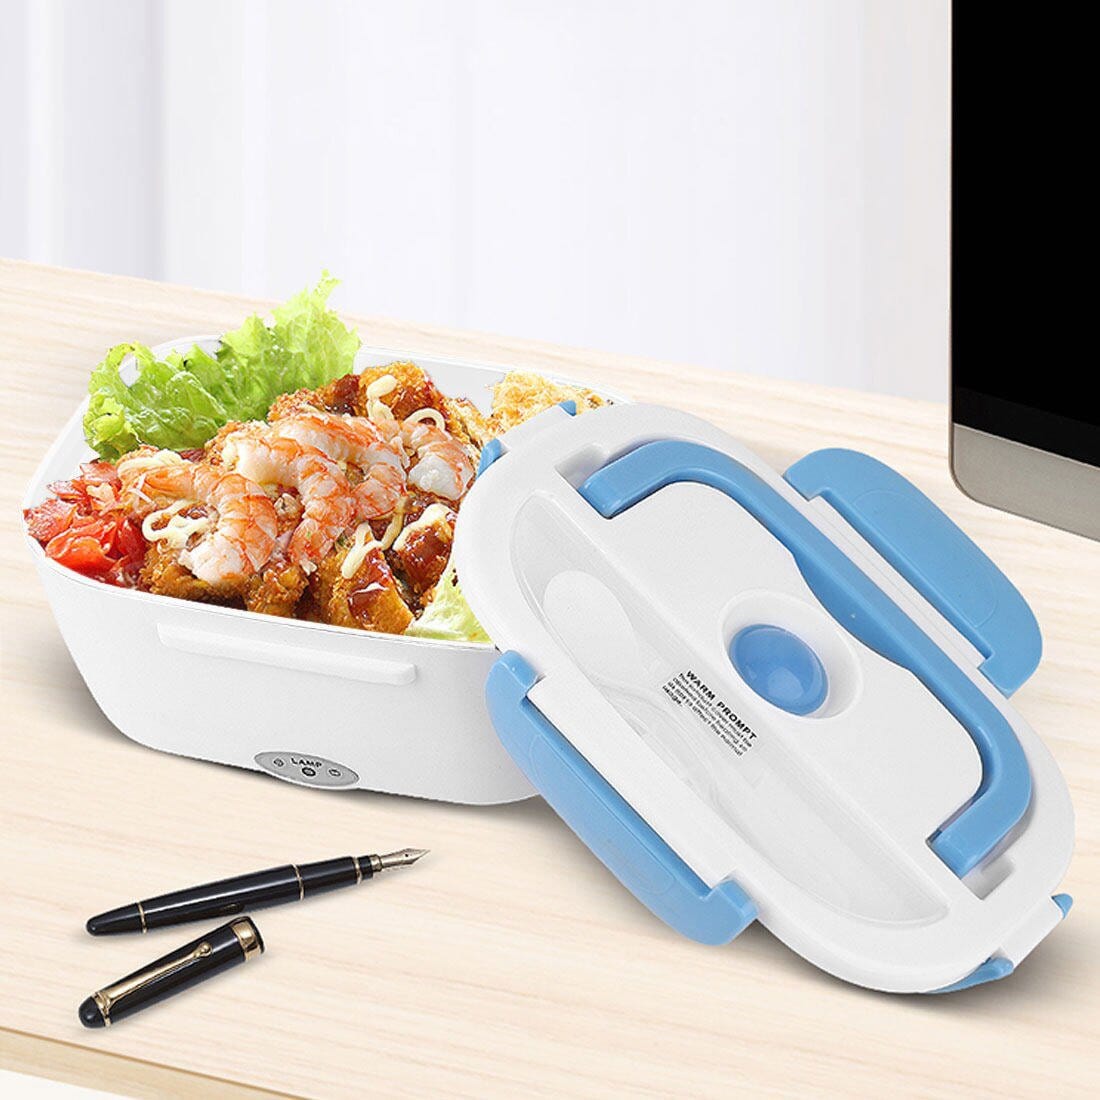 Electric Hot Lunch Box Portable Heated Food Container Heater - Tastrix™ Lunch Boxes Blue Tastrix™ Zaavio®